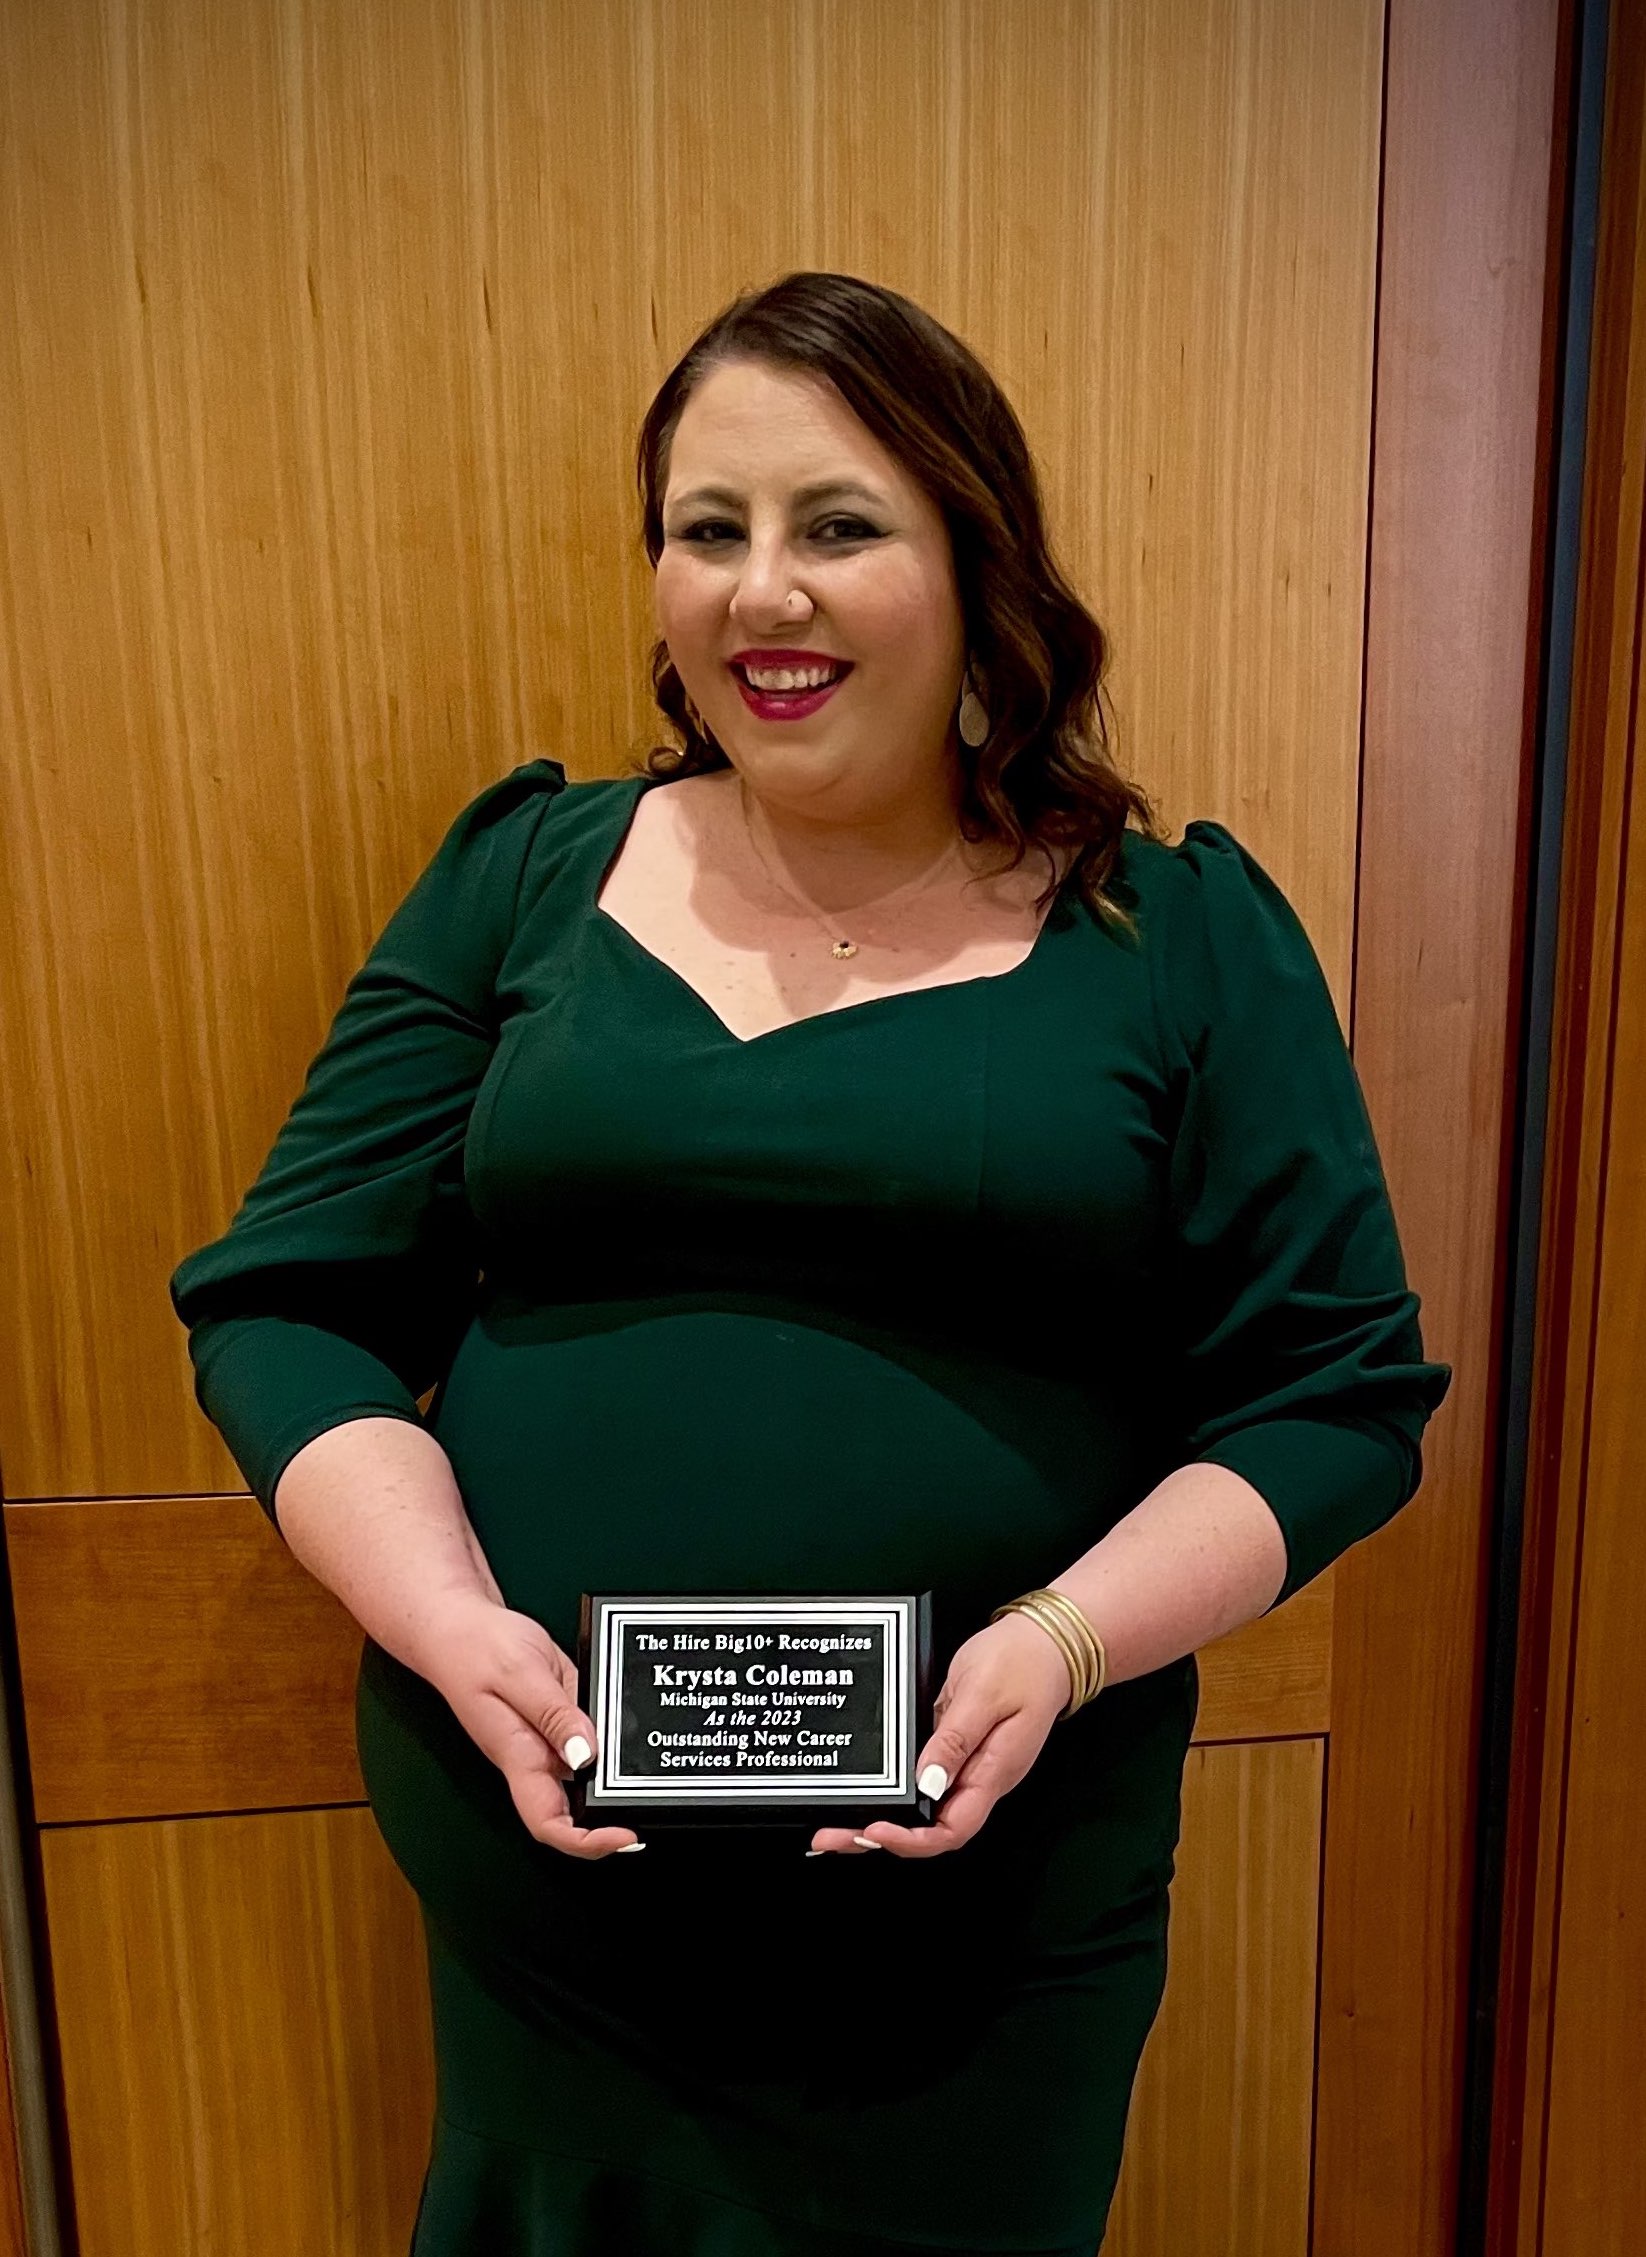 Krysta Foster with Outstanding New Career Services Professional award